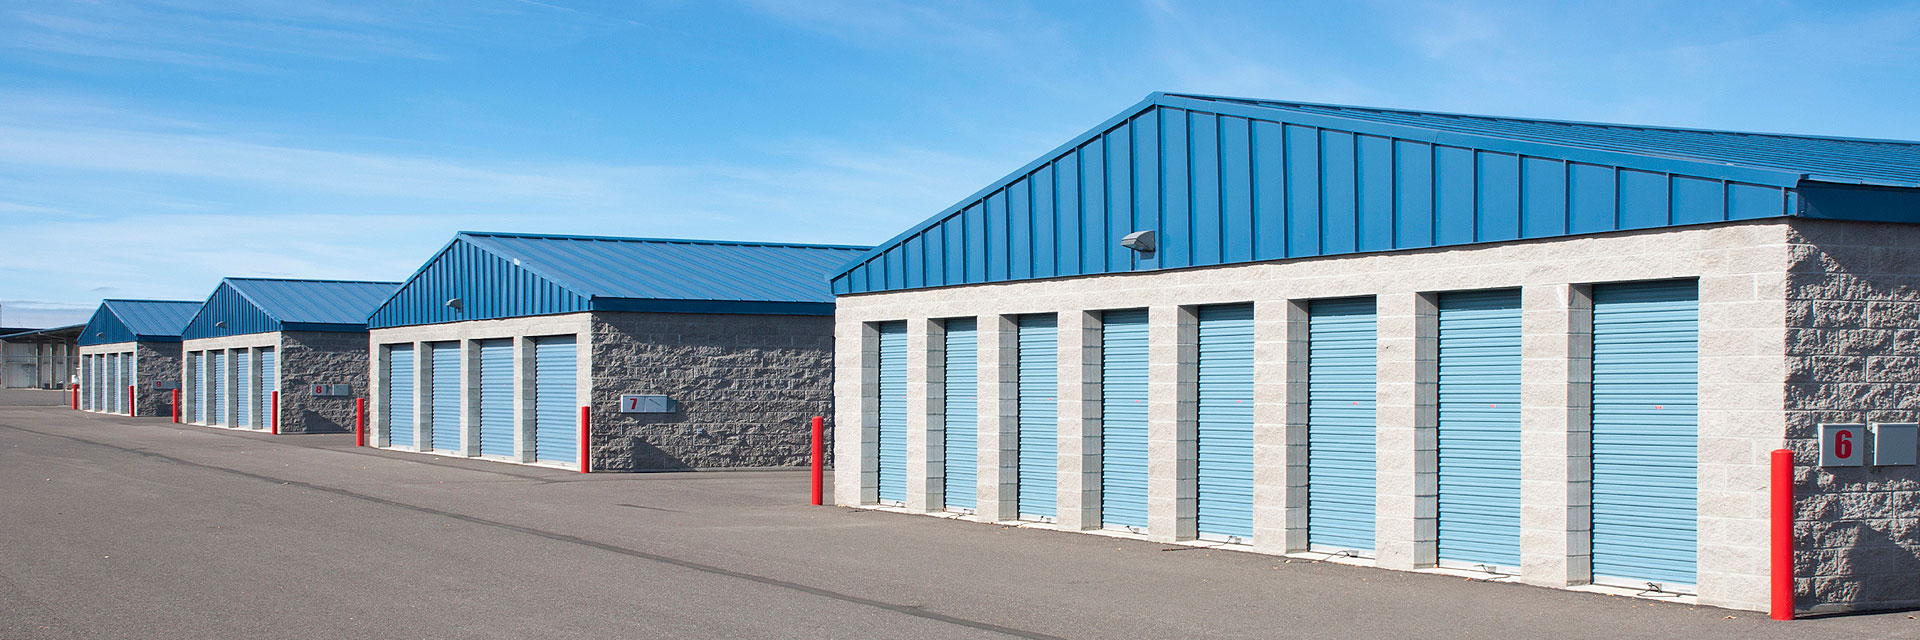 Increase Self-Storage ROI with a CMMS